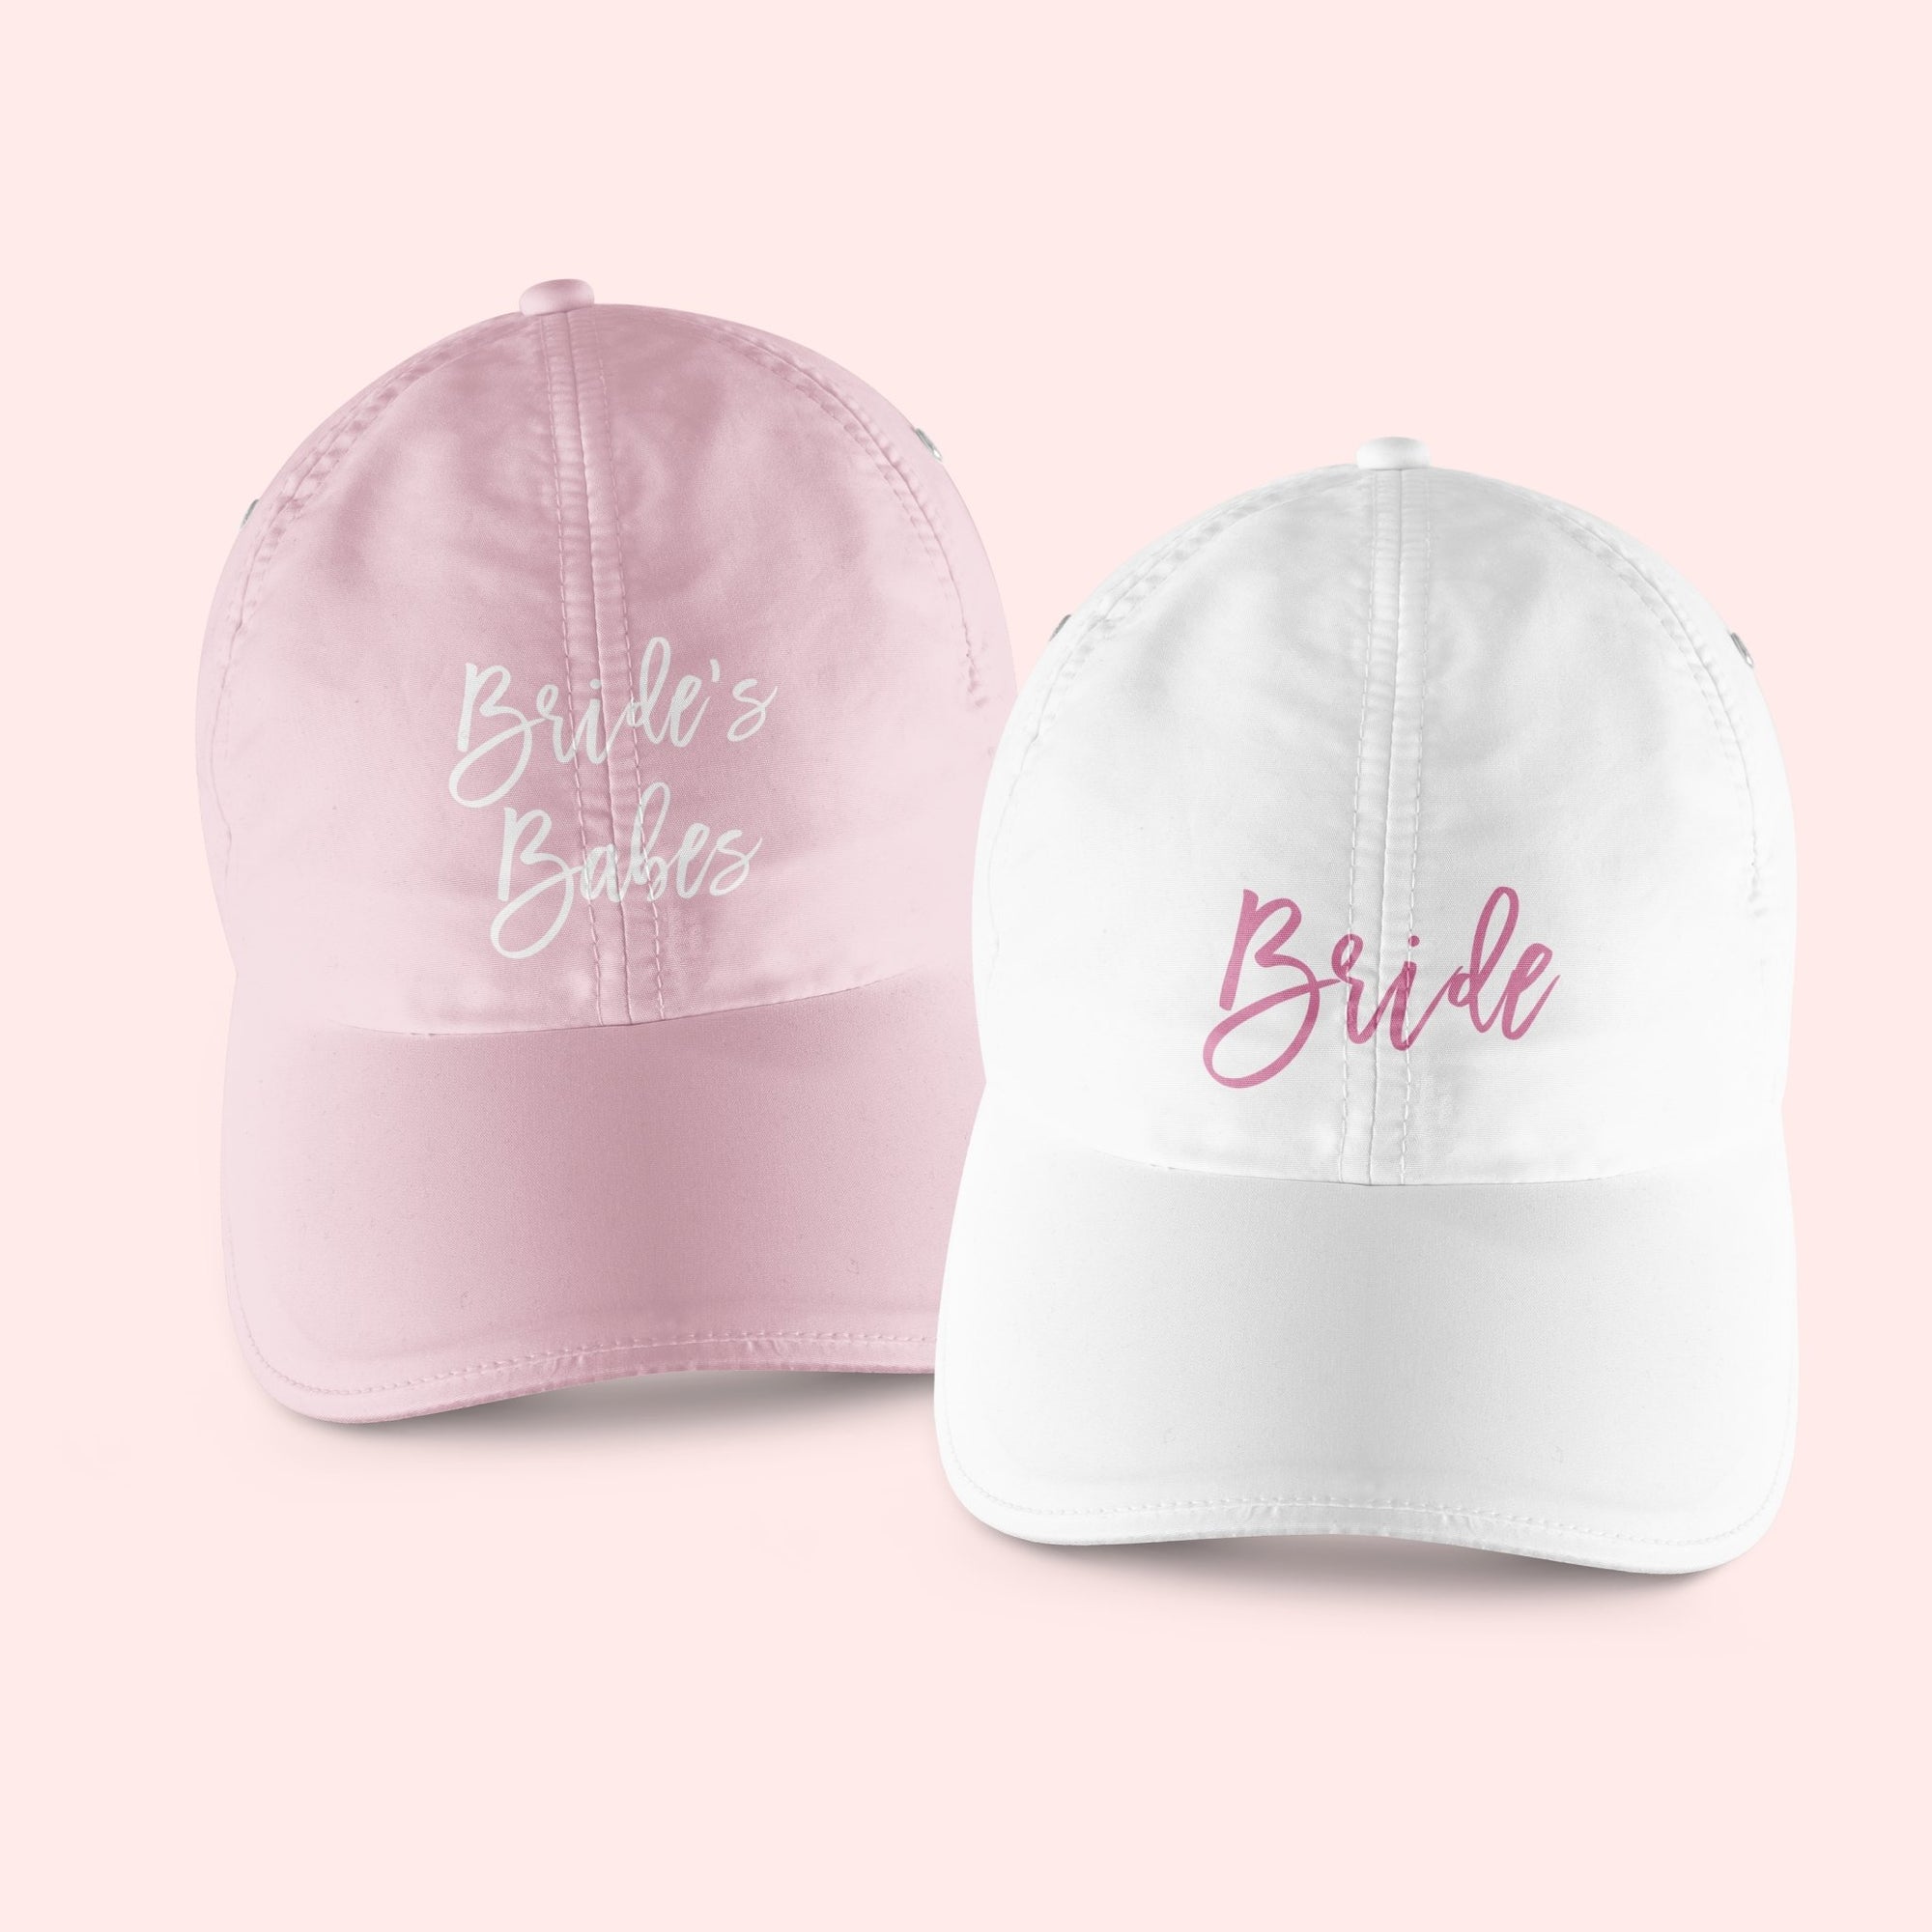 A pink baseball hat which says "Bride's Babes" in script white font sits next to a white baseball hat which says "Bride" in a pink script font.